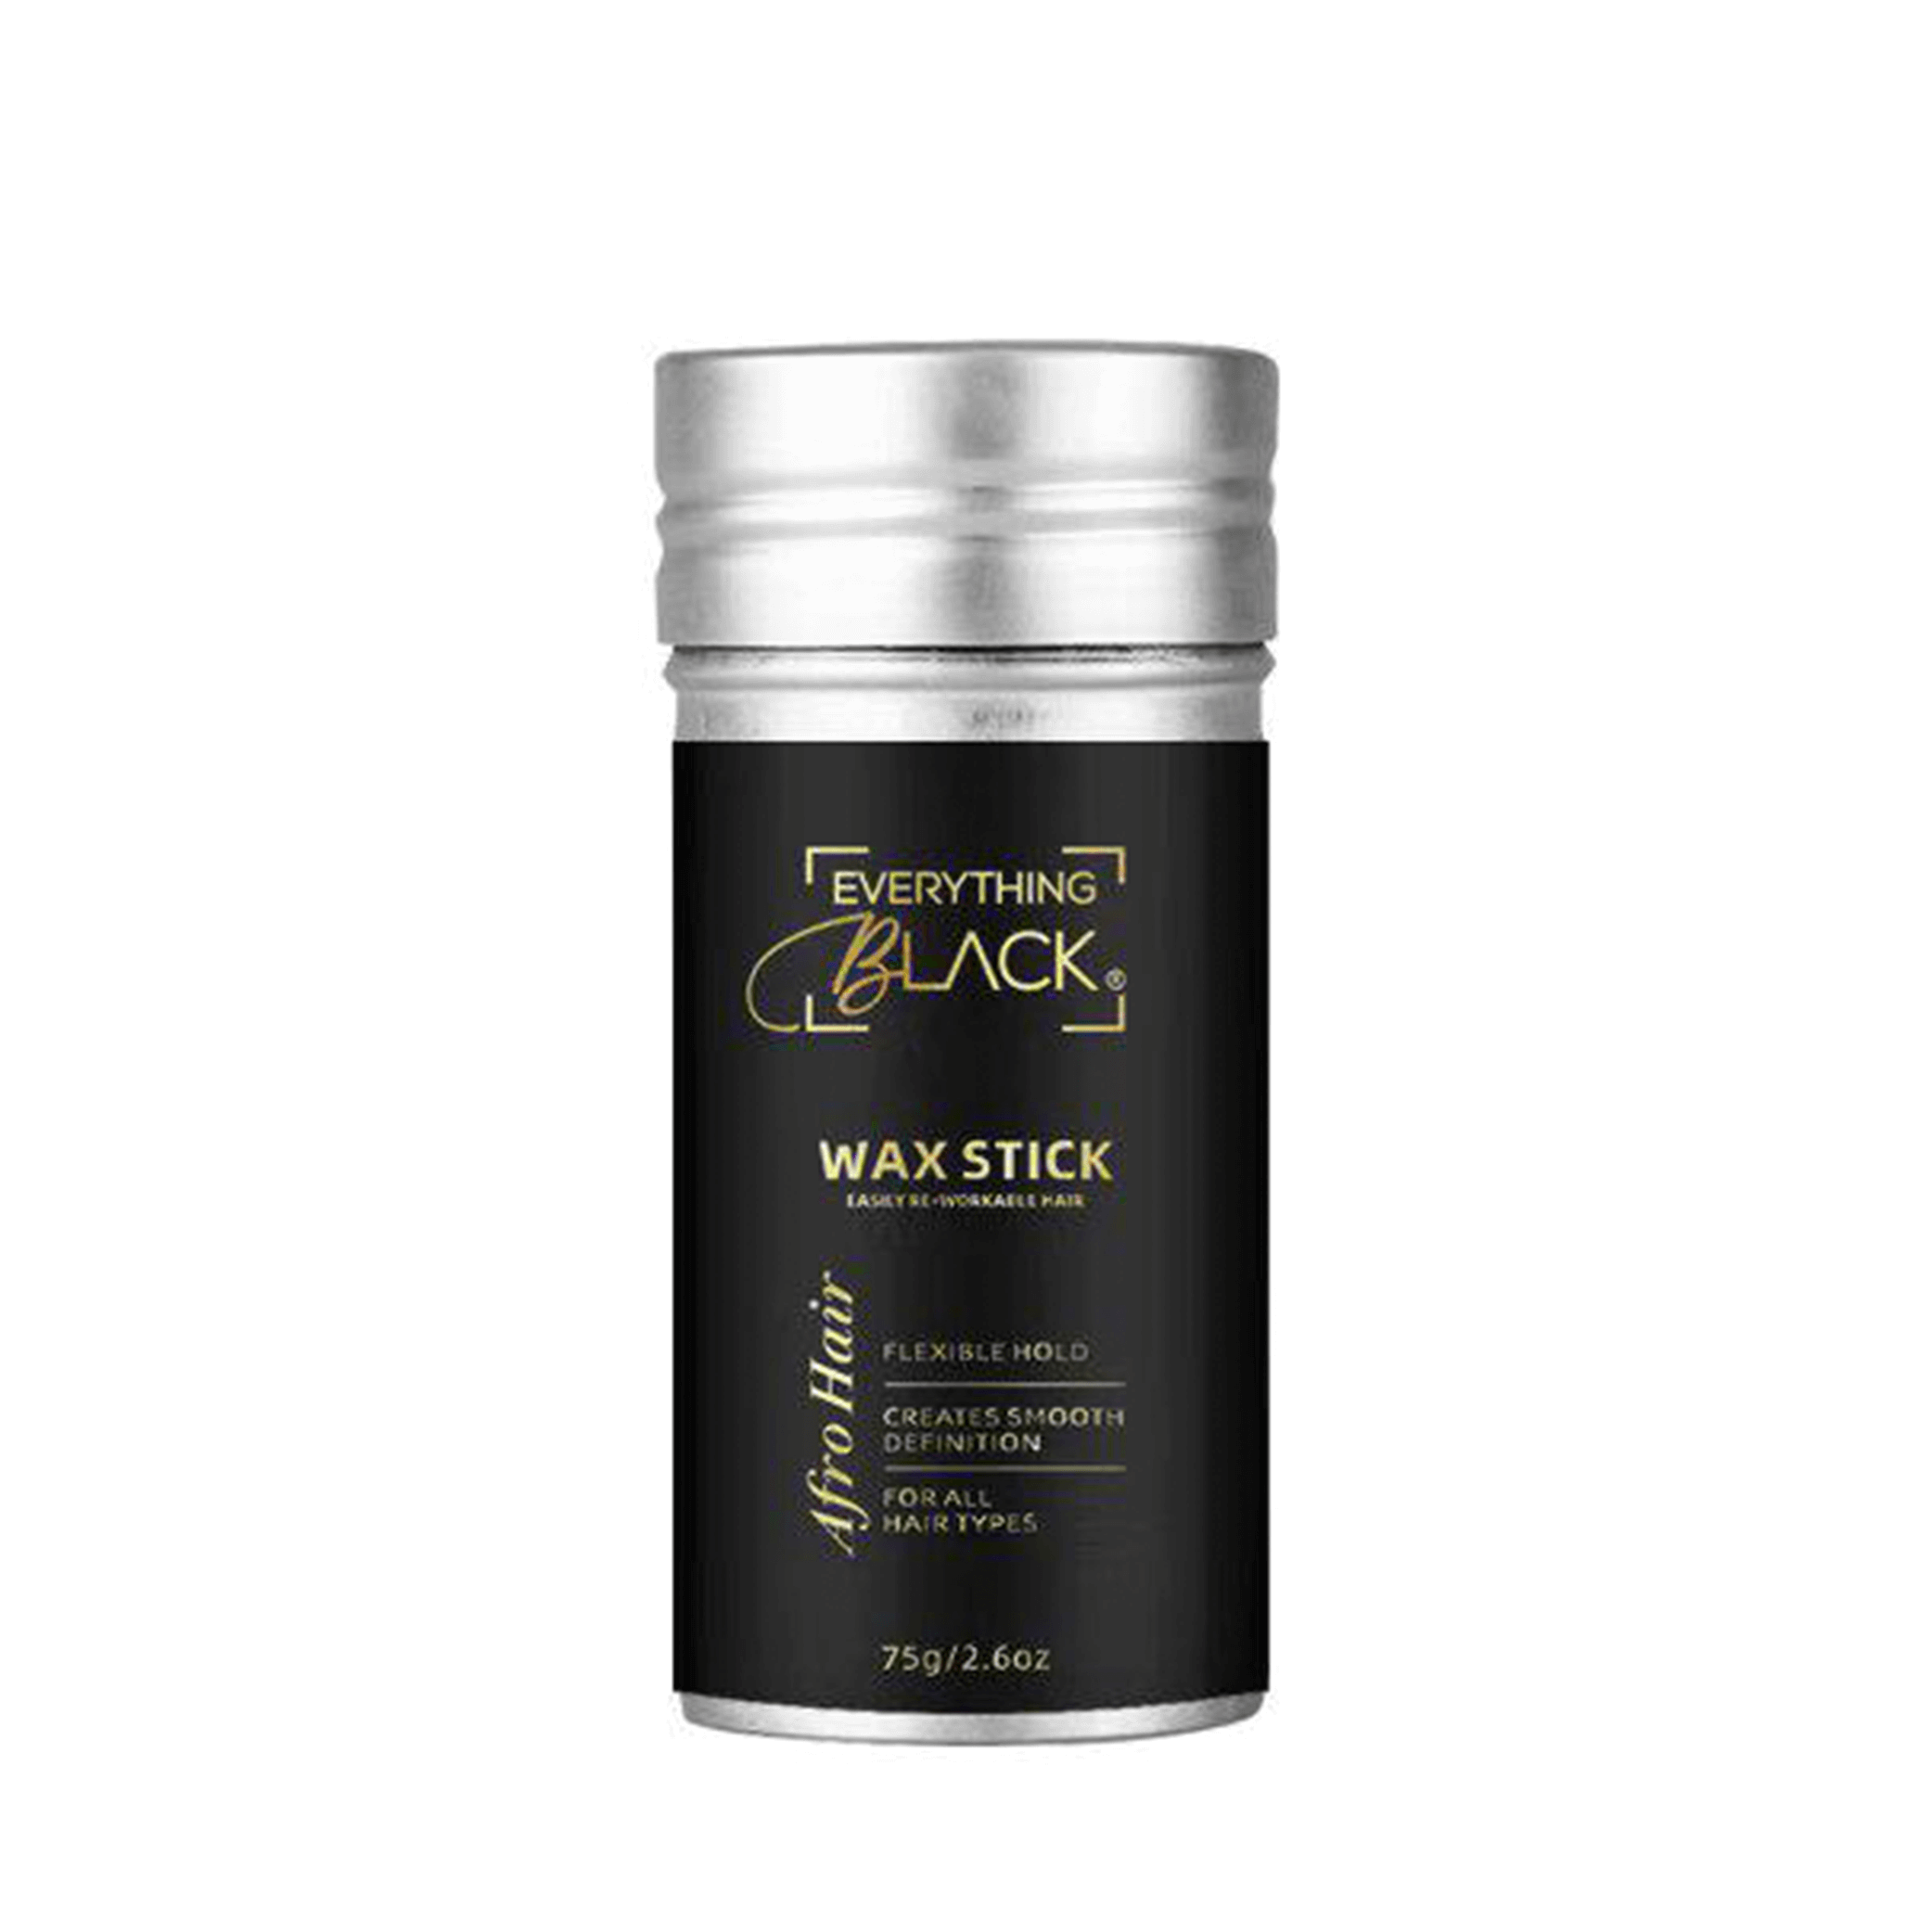 Buy Everything Black's Wax Stick for Natural Looking Styles – Profashion